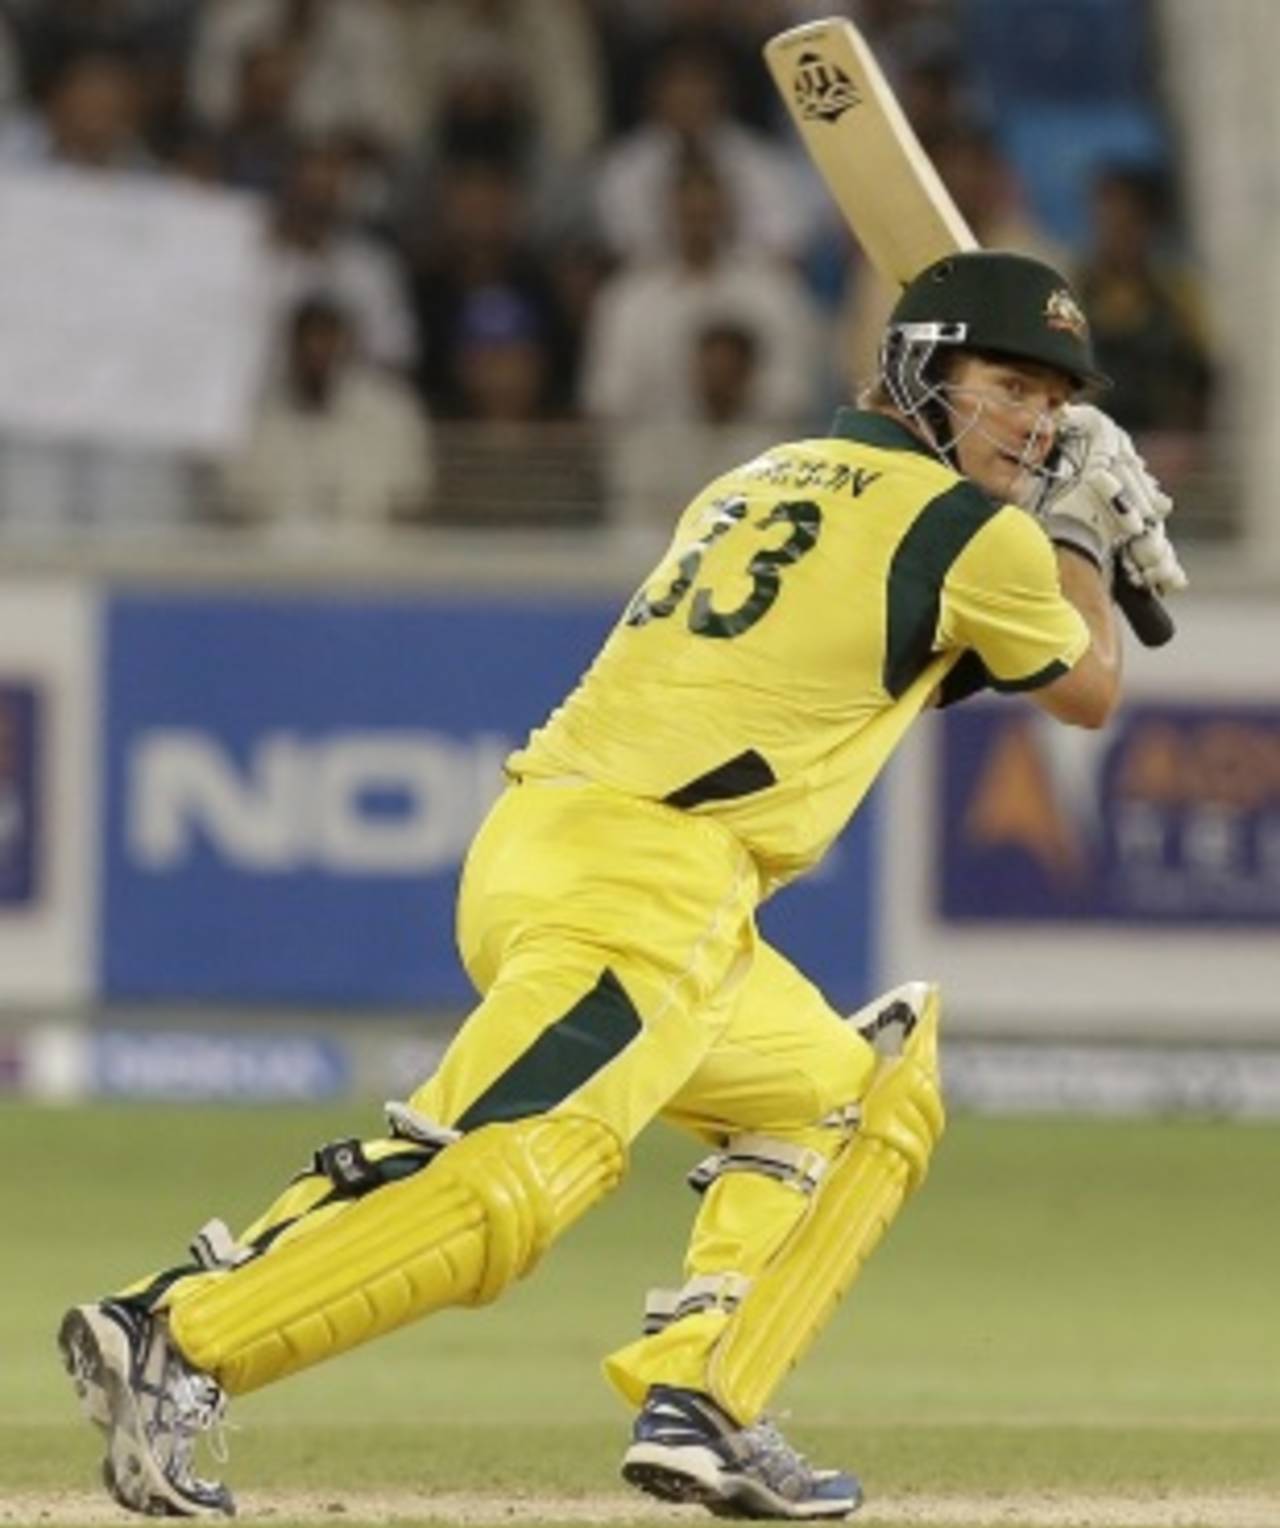 Australia's chances at the World T20 rest heavily on the starts made by Shane Watson and David Warner&nbsp;&nbsp;&bull;&nbsp;&nbsp;Associated Press